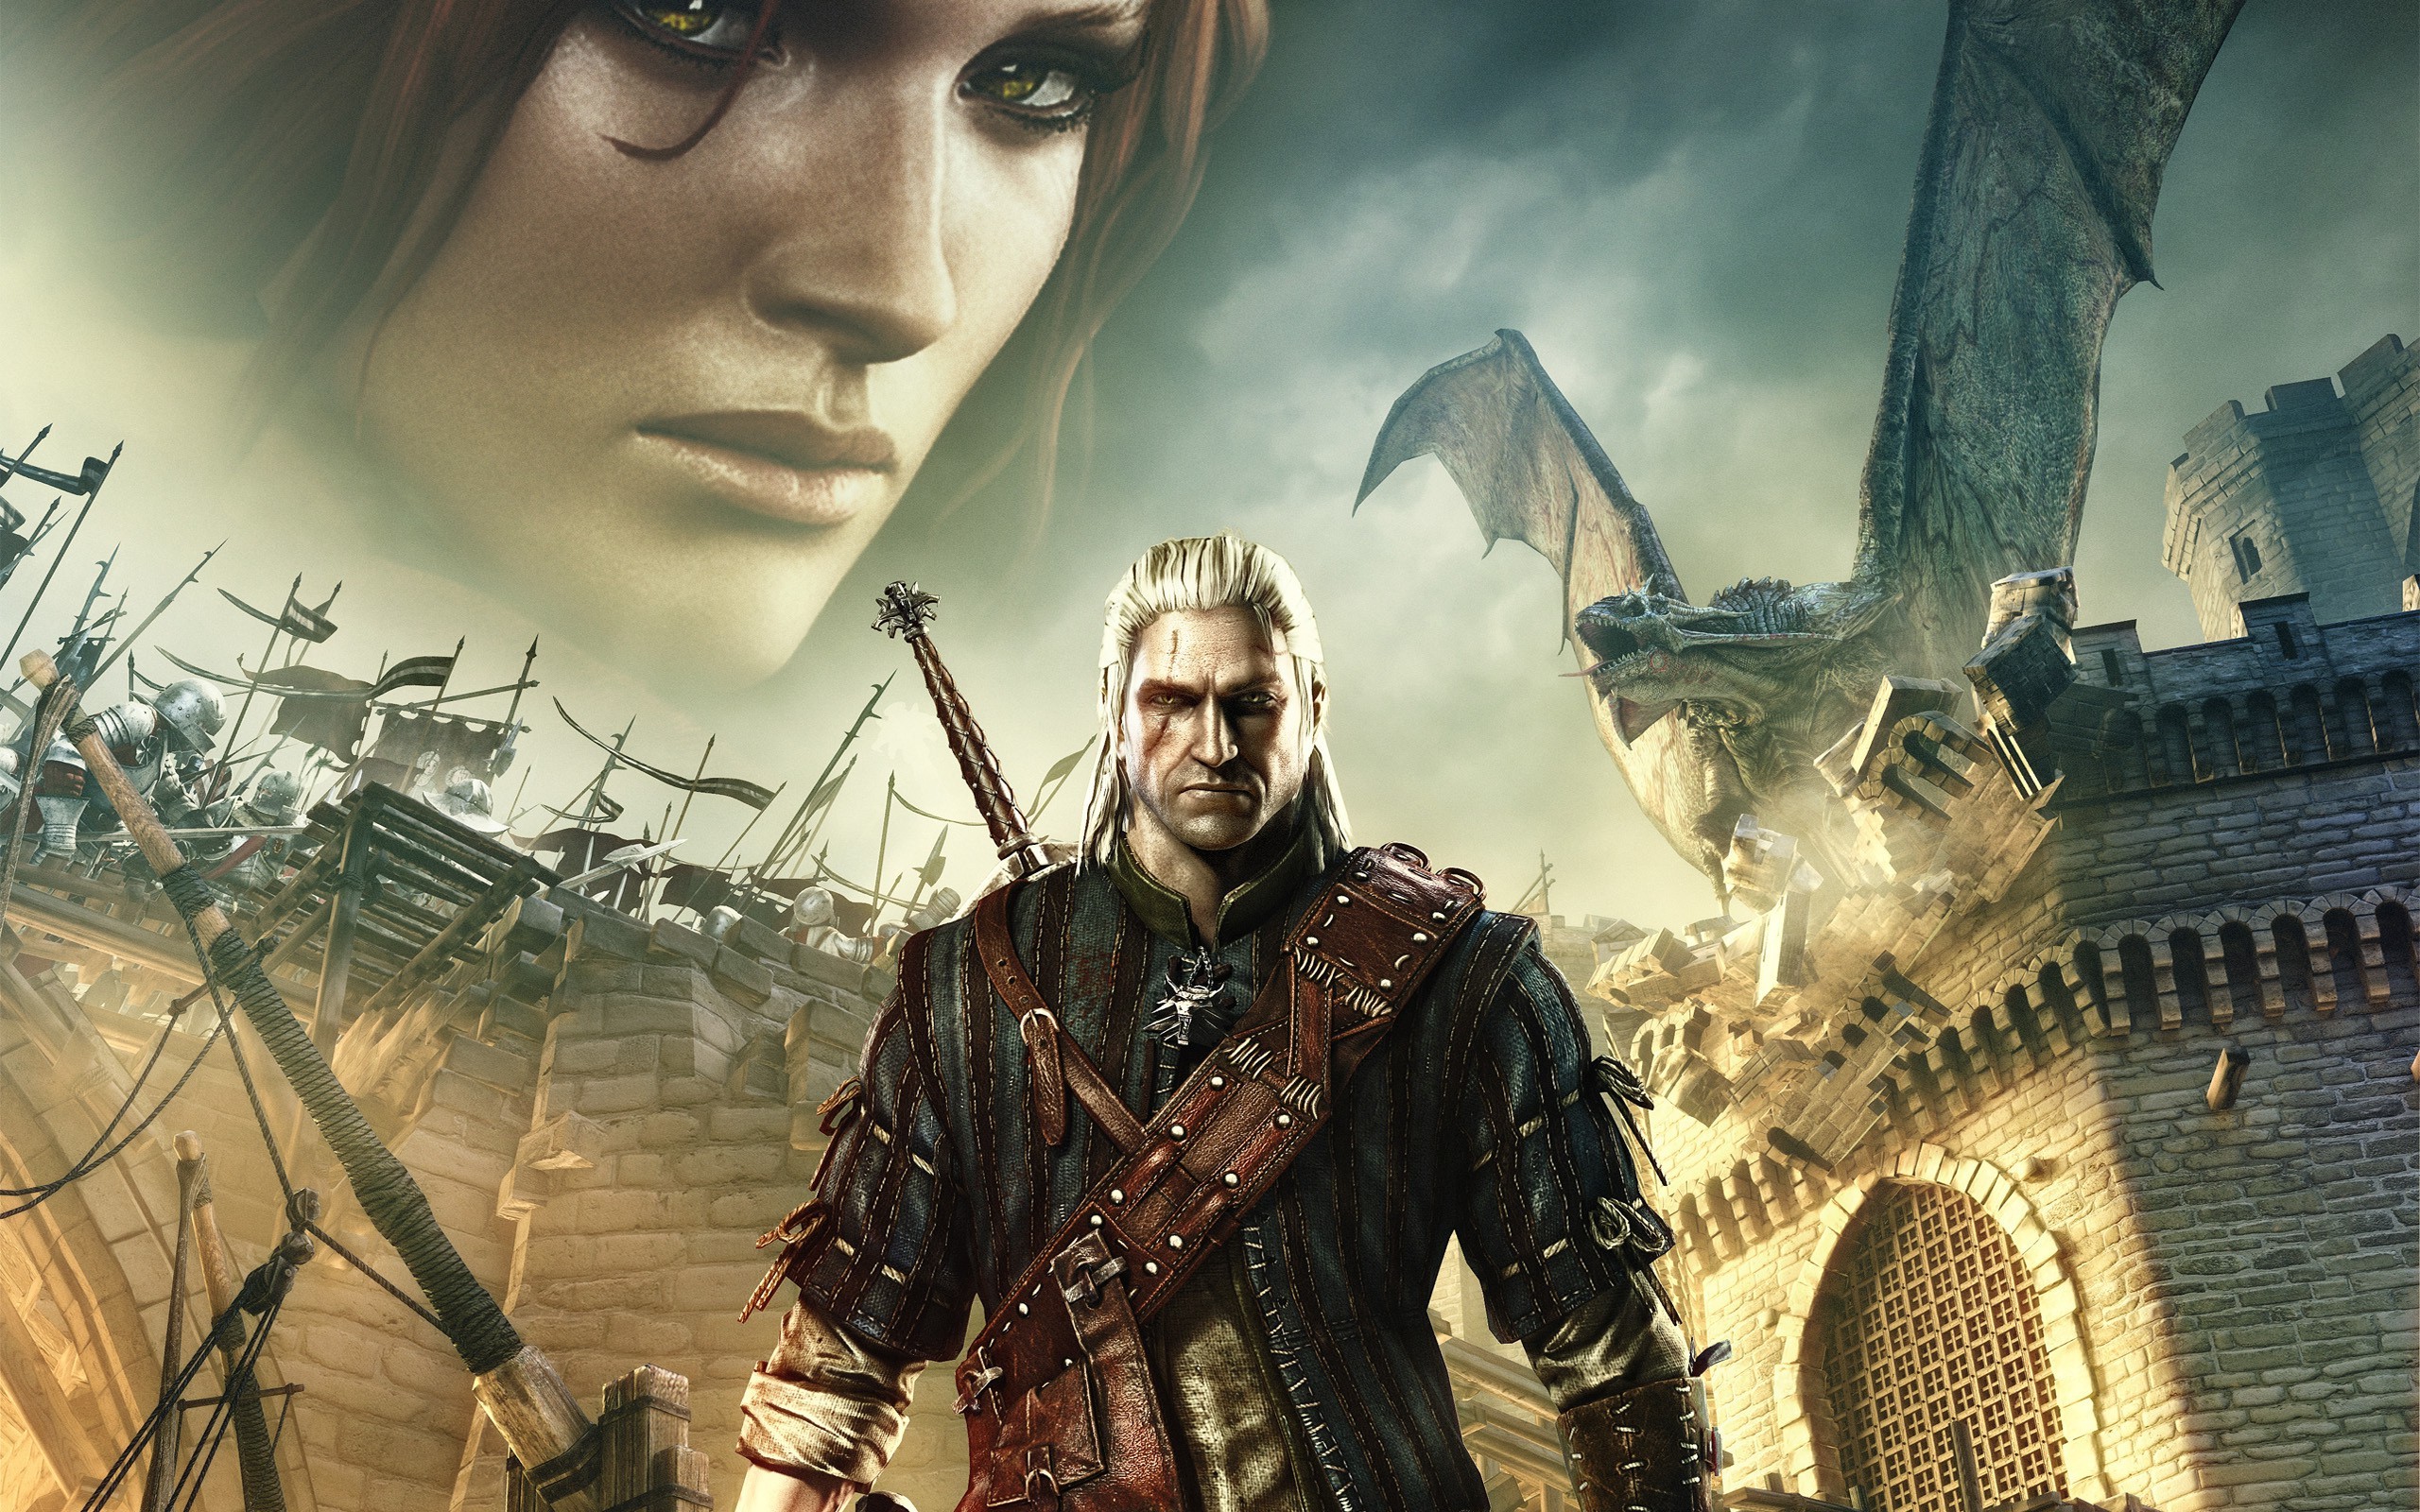 The Witcher 2 Assassins Of Kings, The Witcher, Triss Merigold, Geralt Of Rivia Wallpaper